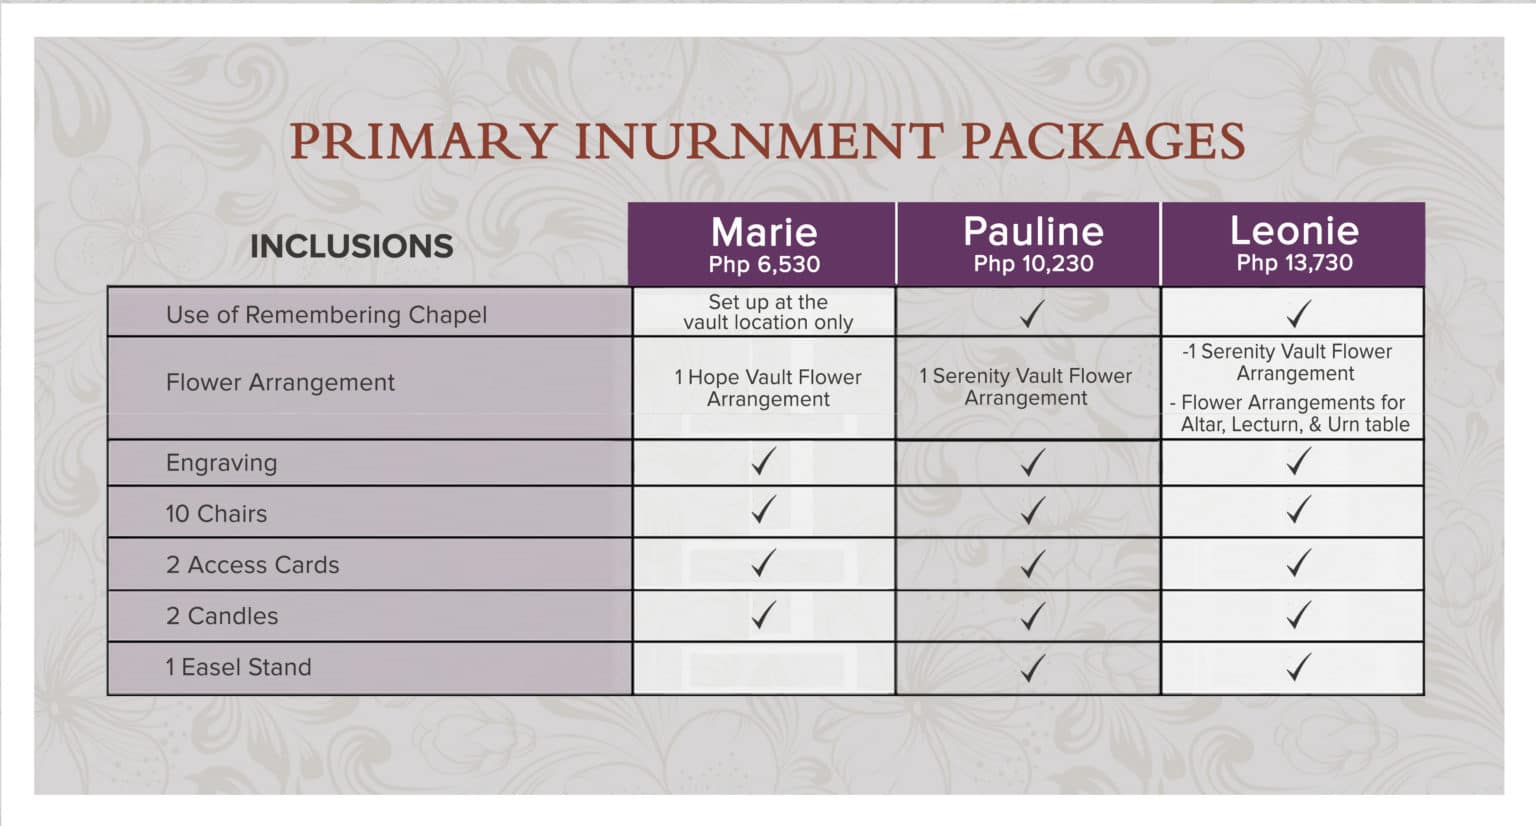 Inrnment Package 1 rev021622 1536x826 1